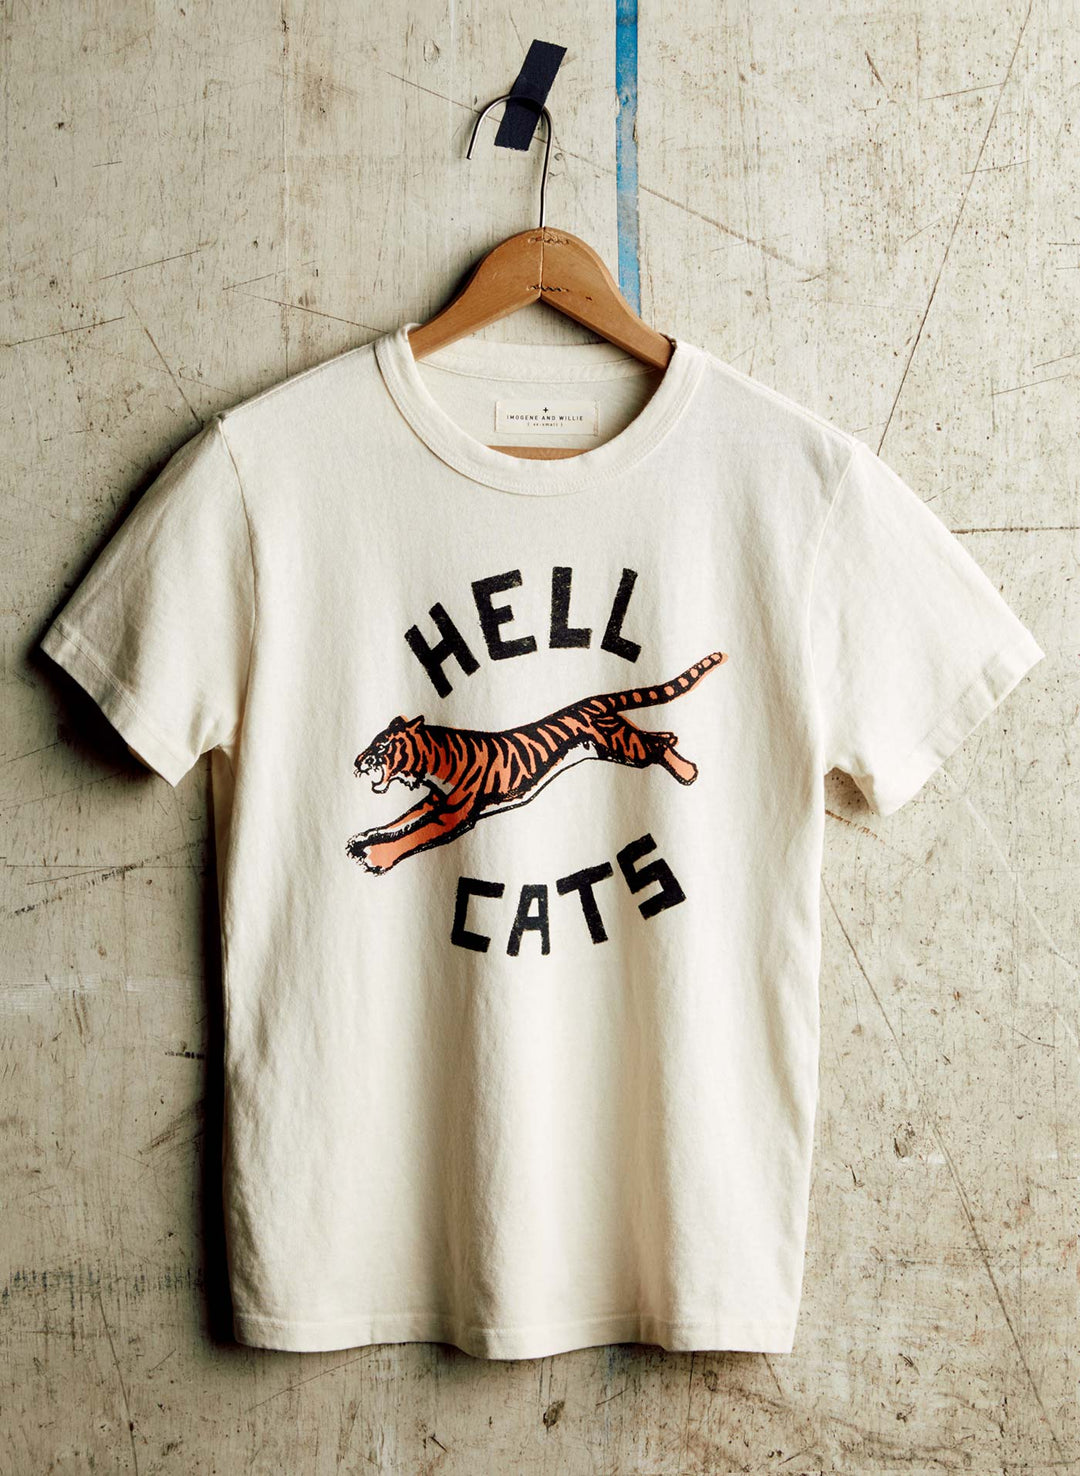 a white t-shirt with a tiger on it